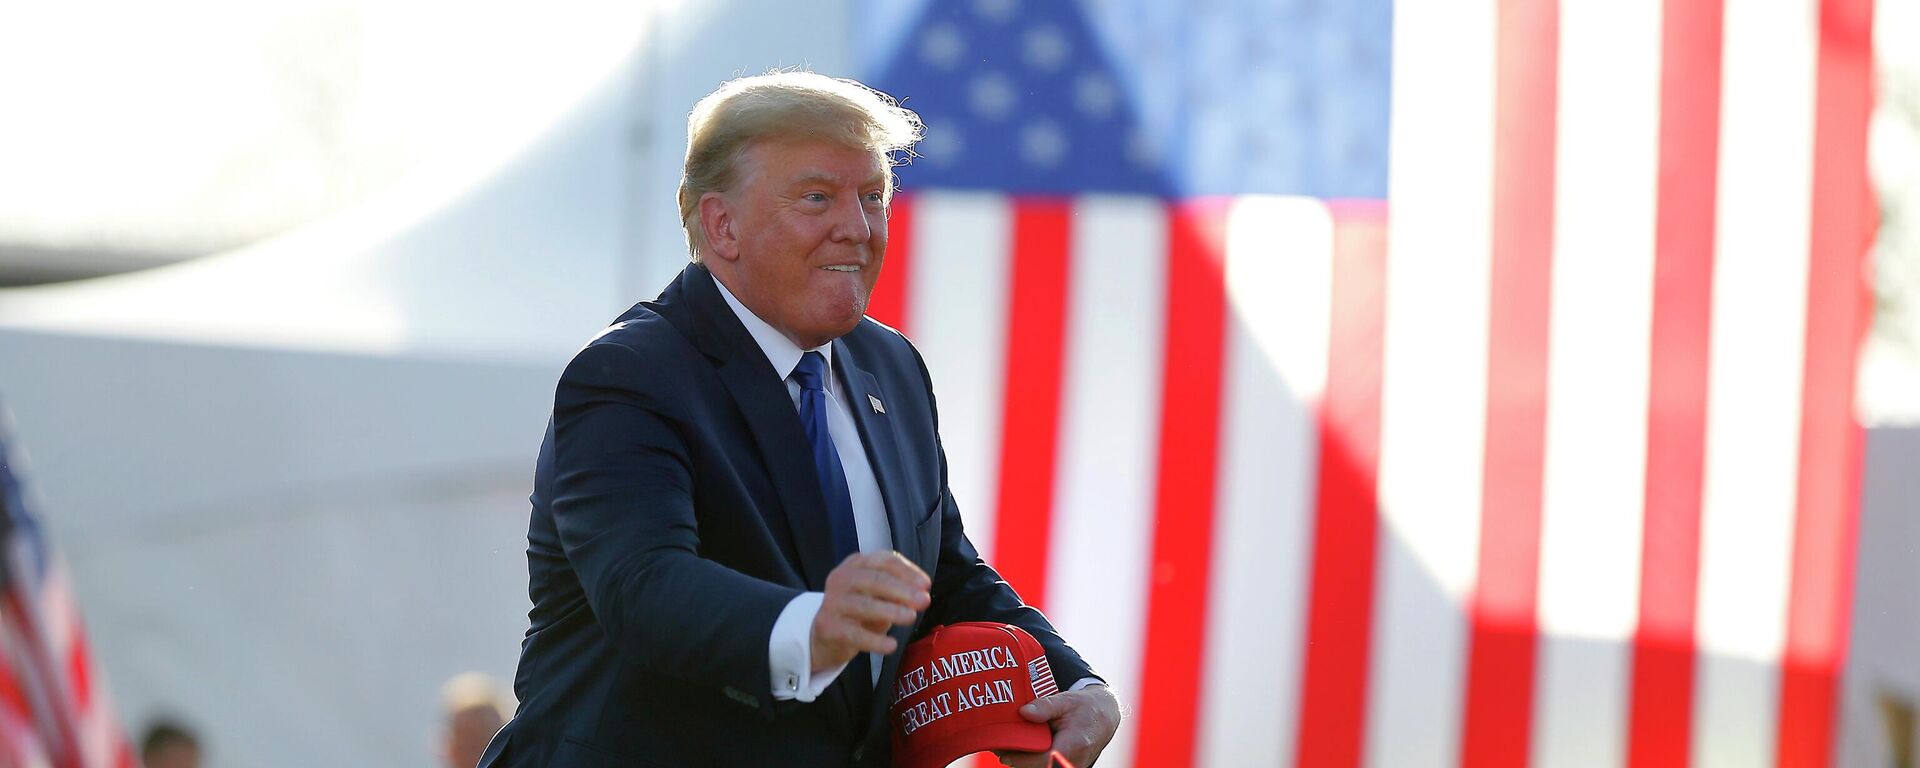 Former President Donald Trump is introduced at a rally at the Delaware County Fairgrounds, Saturday, April 23, 2022, in Delaware, Ohio, to endorse Republican candidates ahead of the Ohio primary on May 3.  - Sputnik International, 1920, 24.04.2022